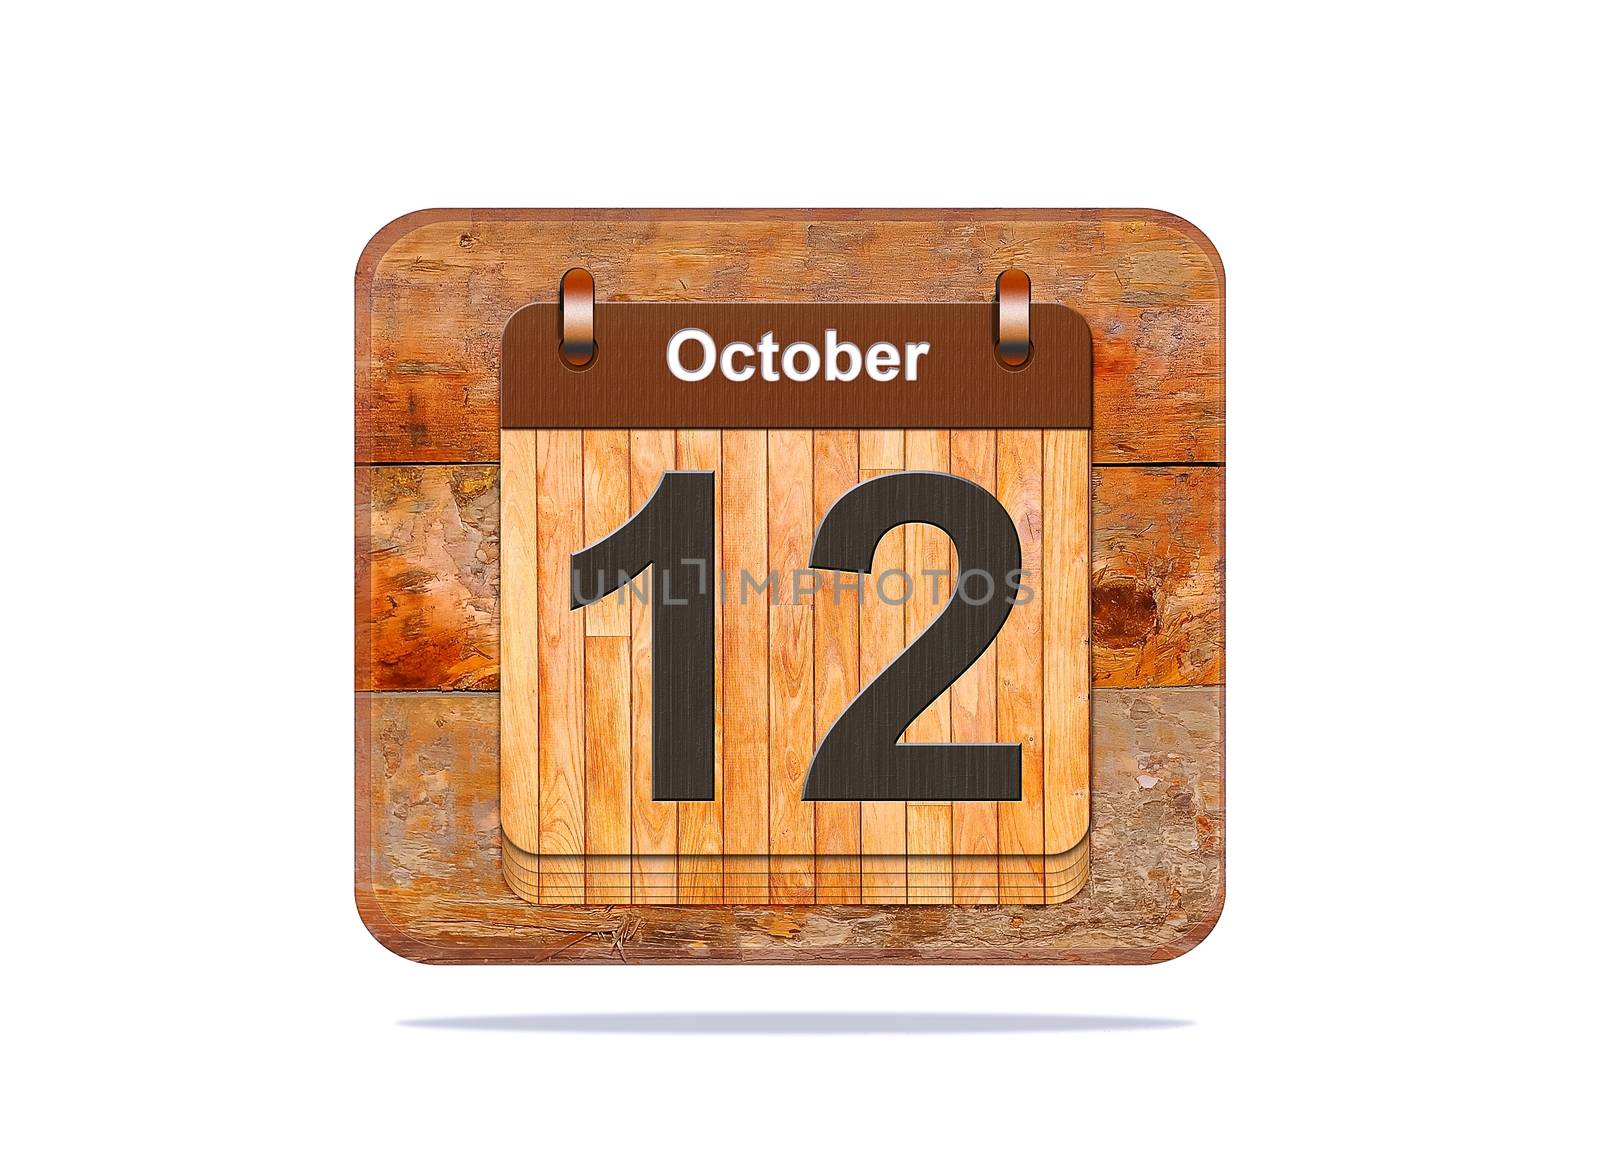 Calendar with the date of October 12.